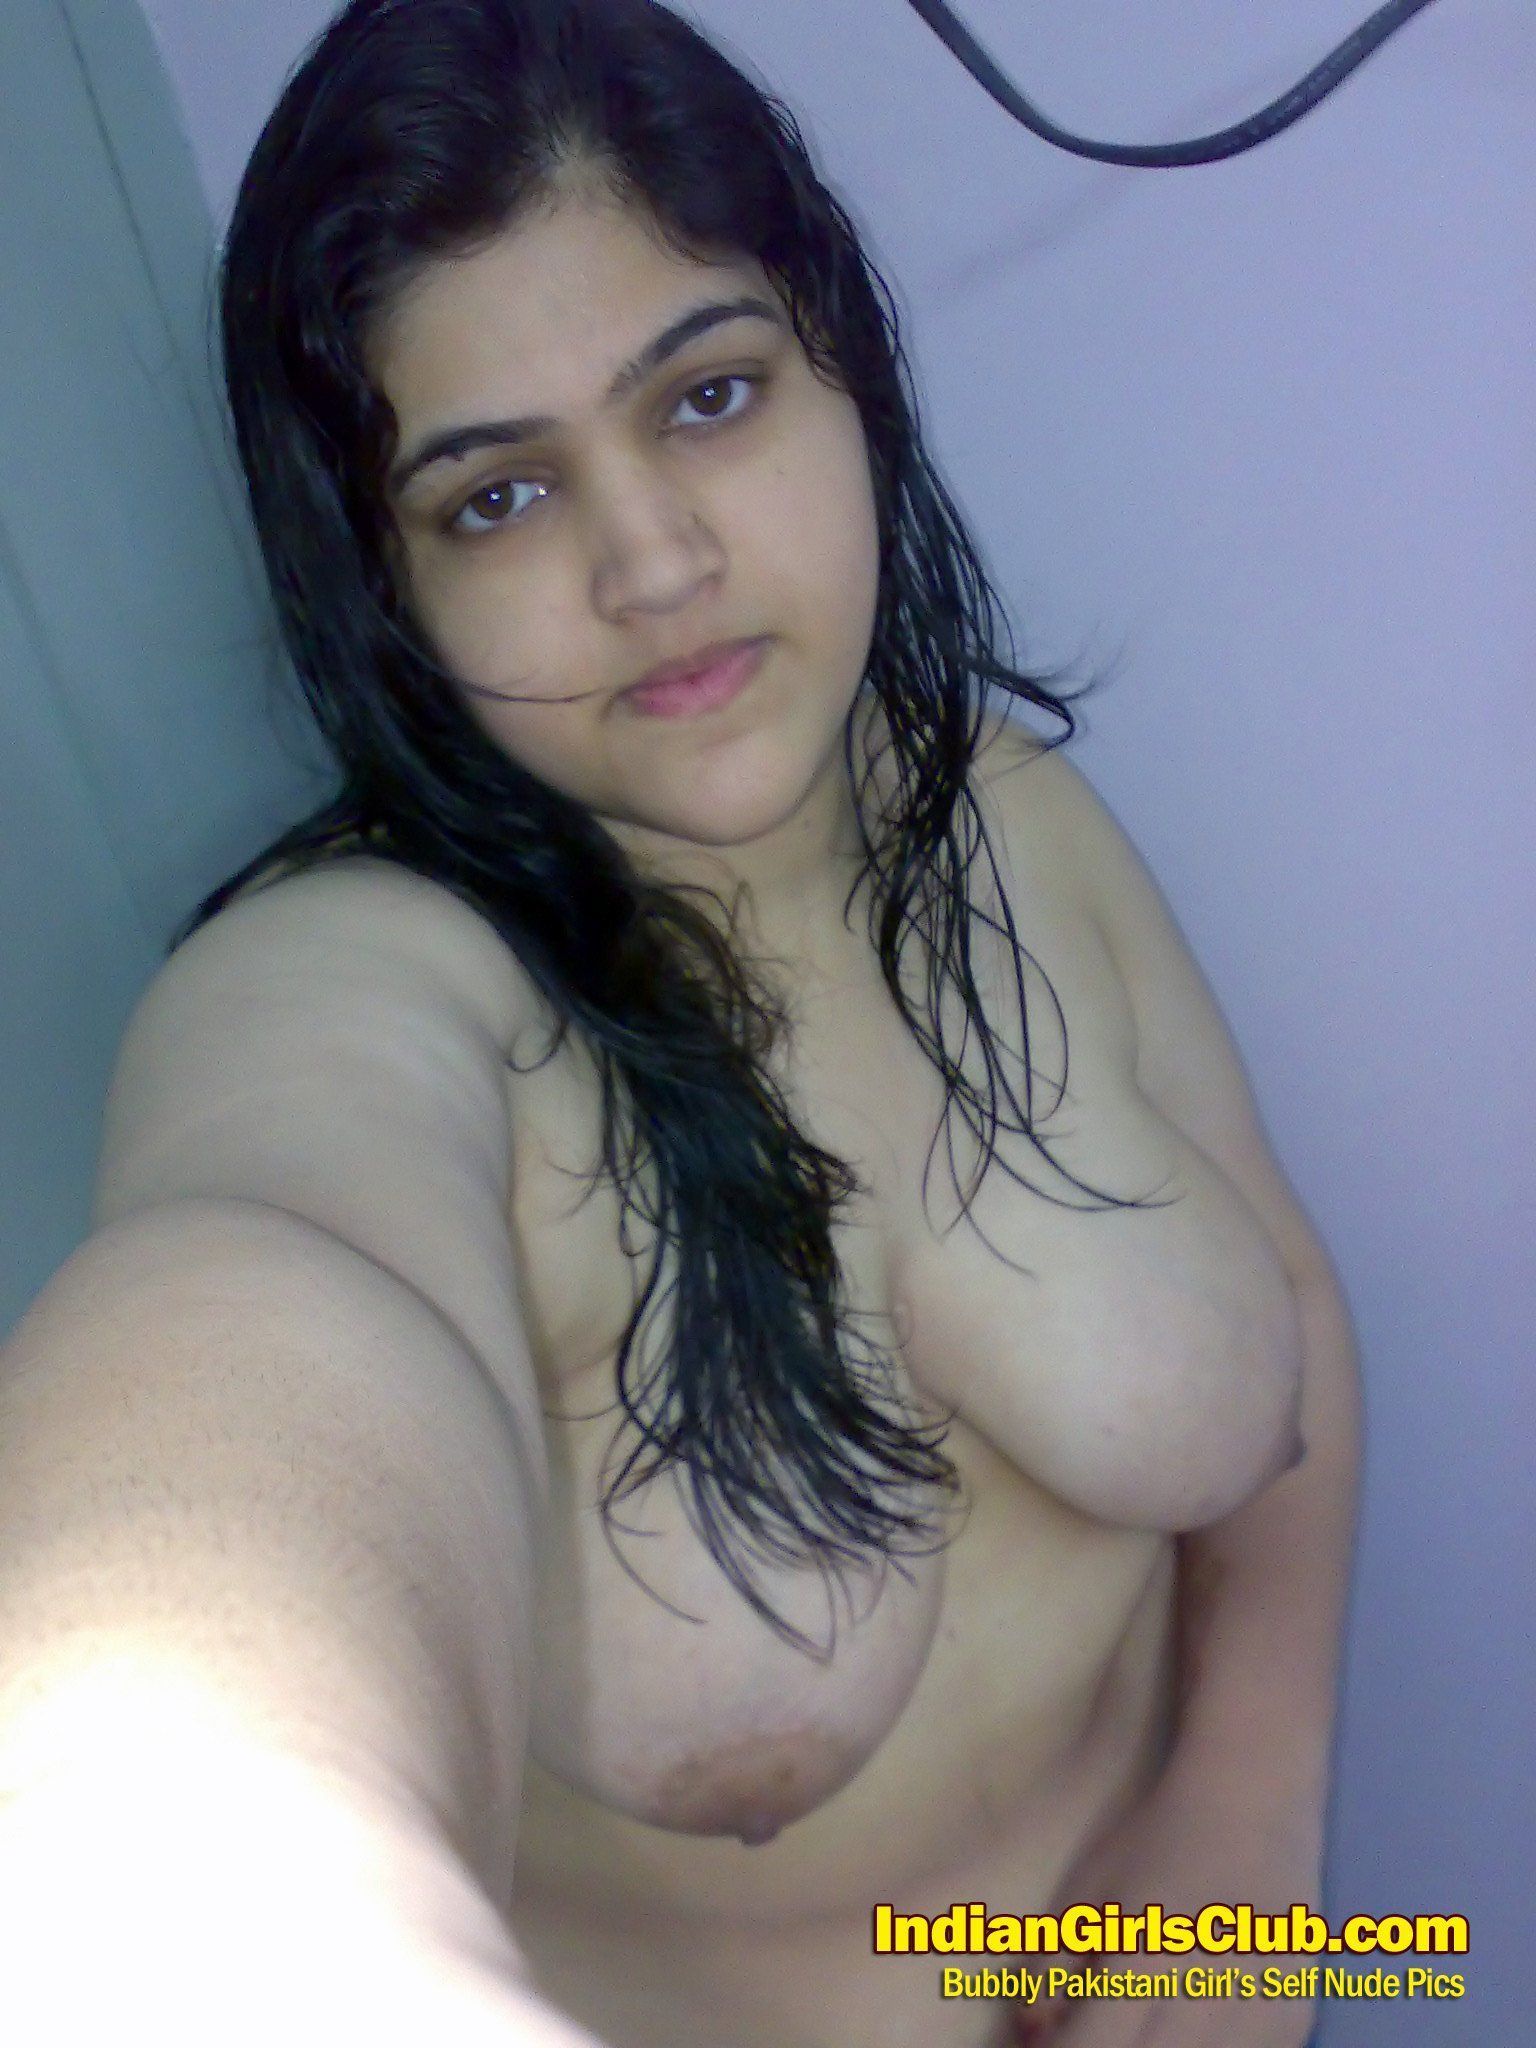 Horny pakistani women-pics and galleries